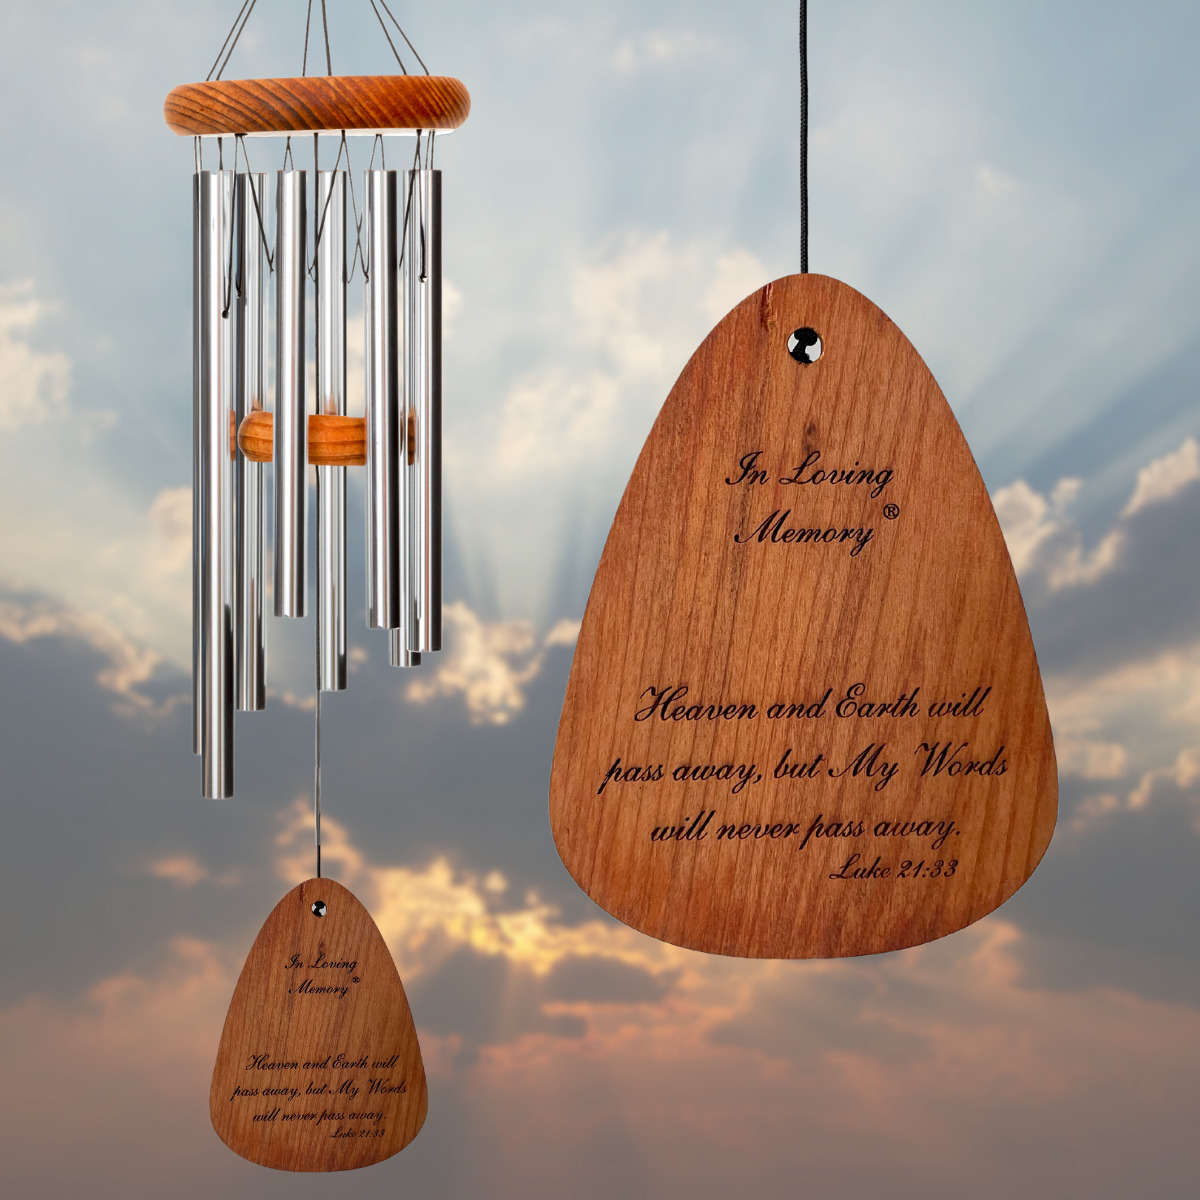 In Loving Memory 24 Inch Windchime - My Words will never pass away... in Silver